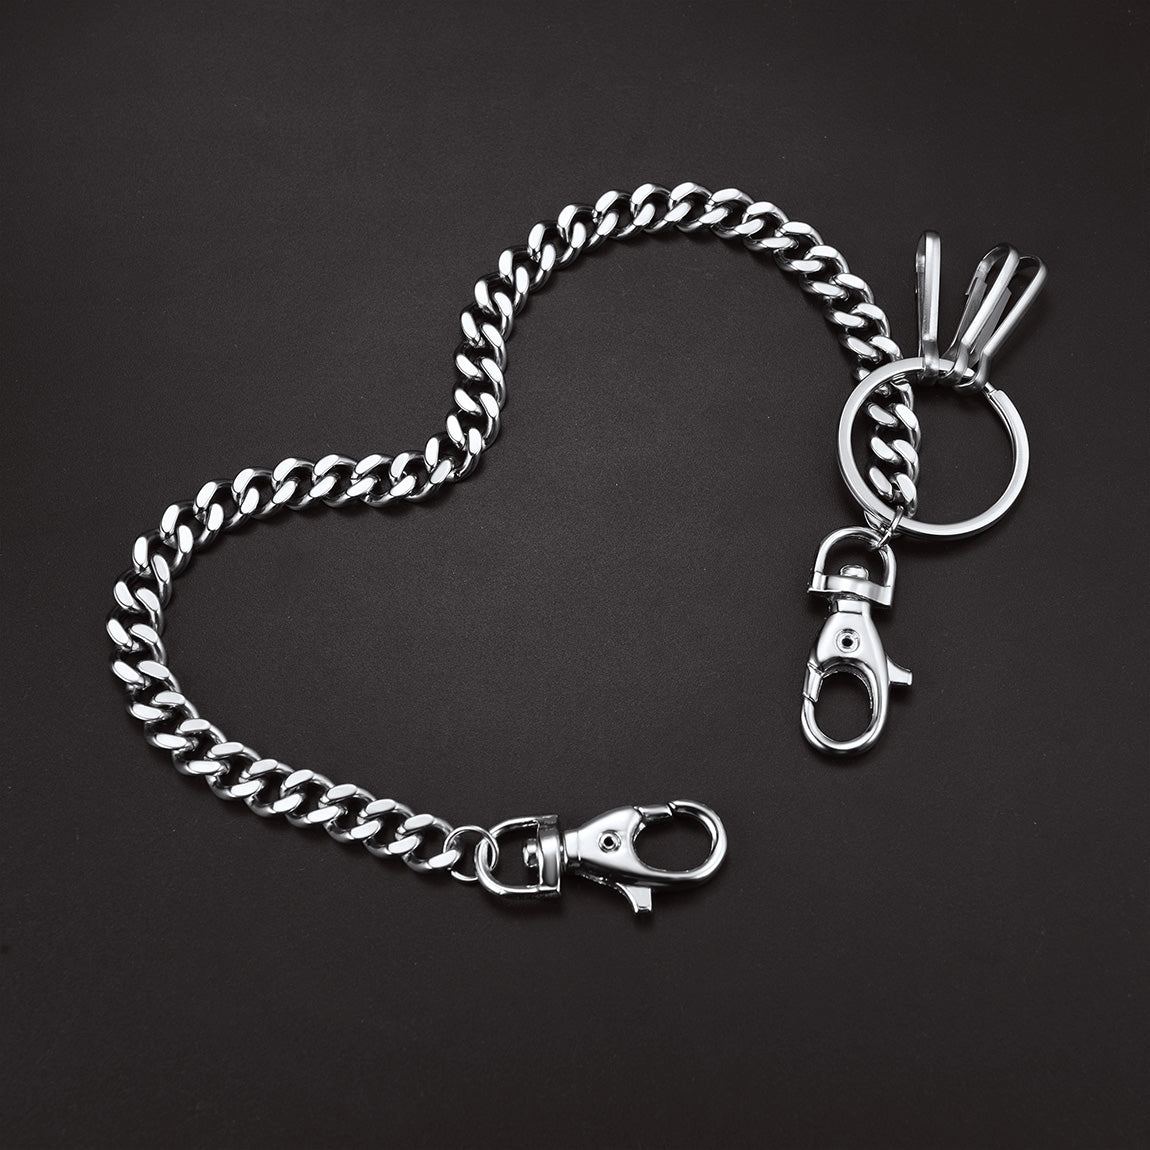 ChainsPro Sturdy Pants/Wallet Chain/Key Chain